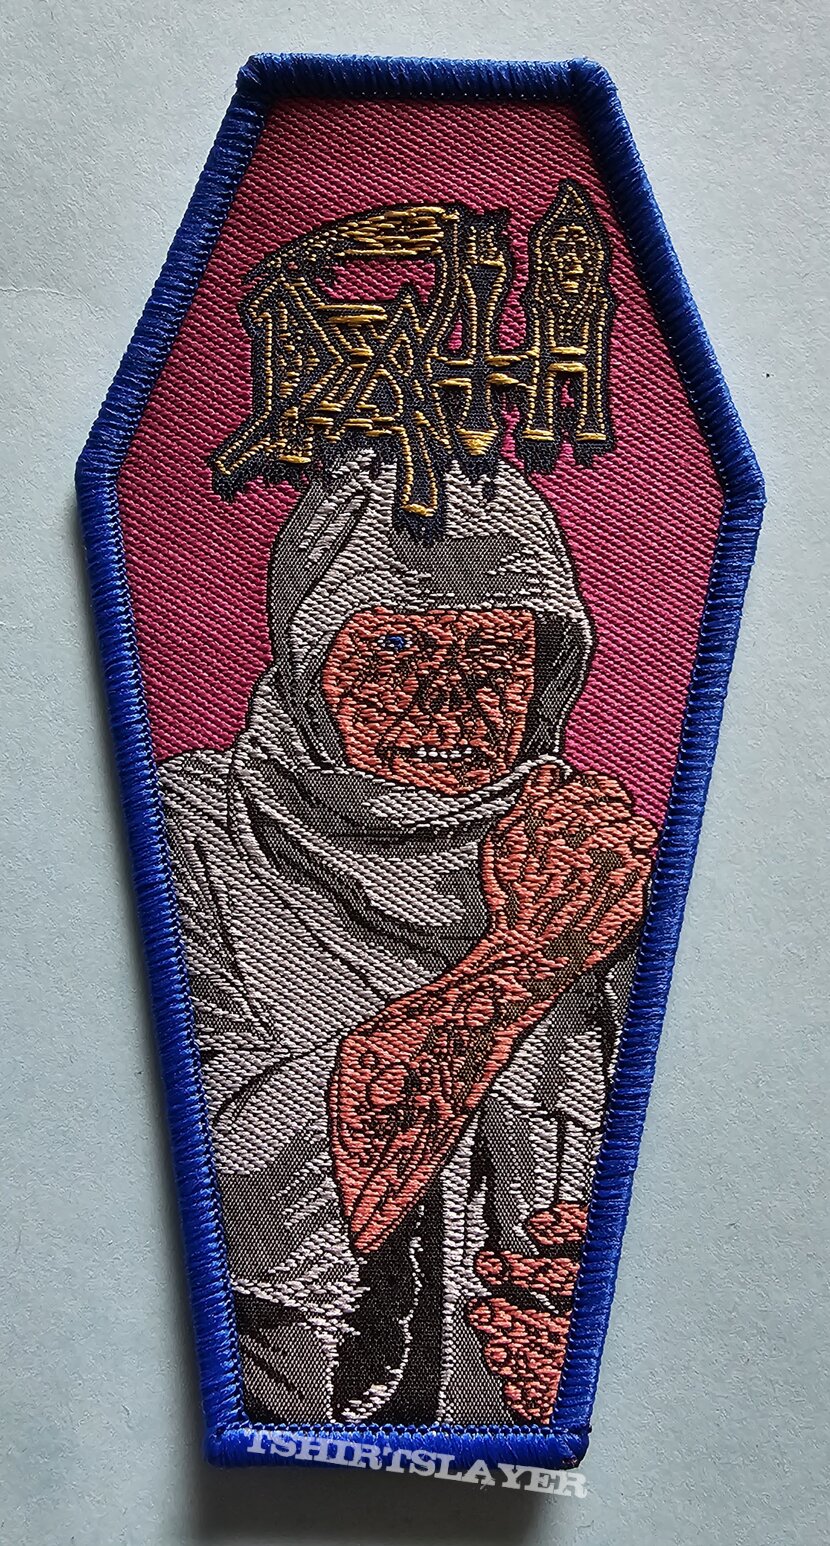 Death Leprosy Coffin Patch